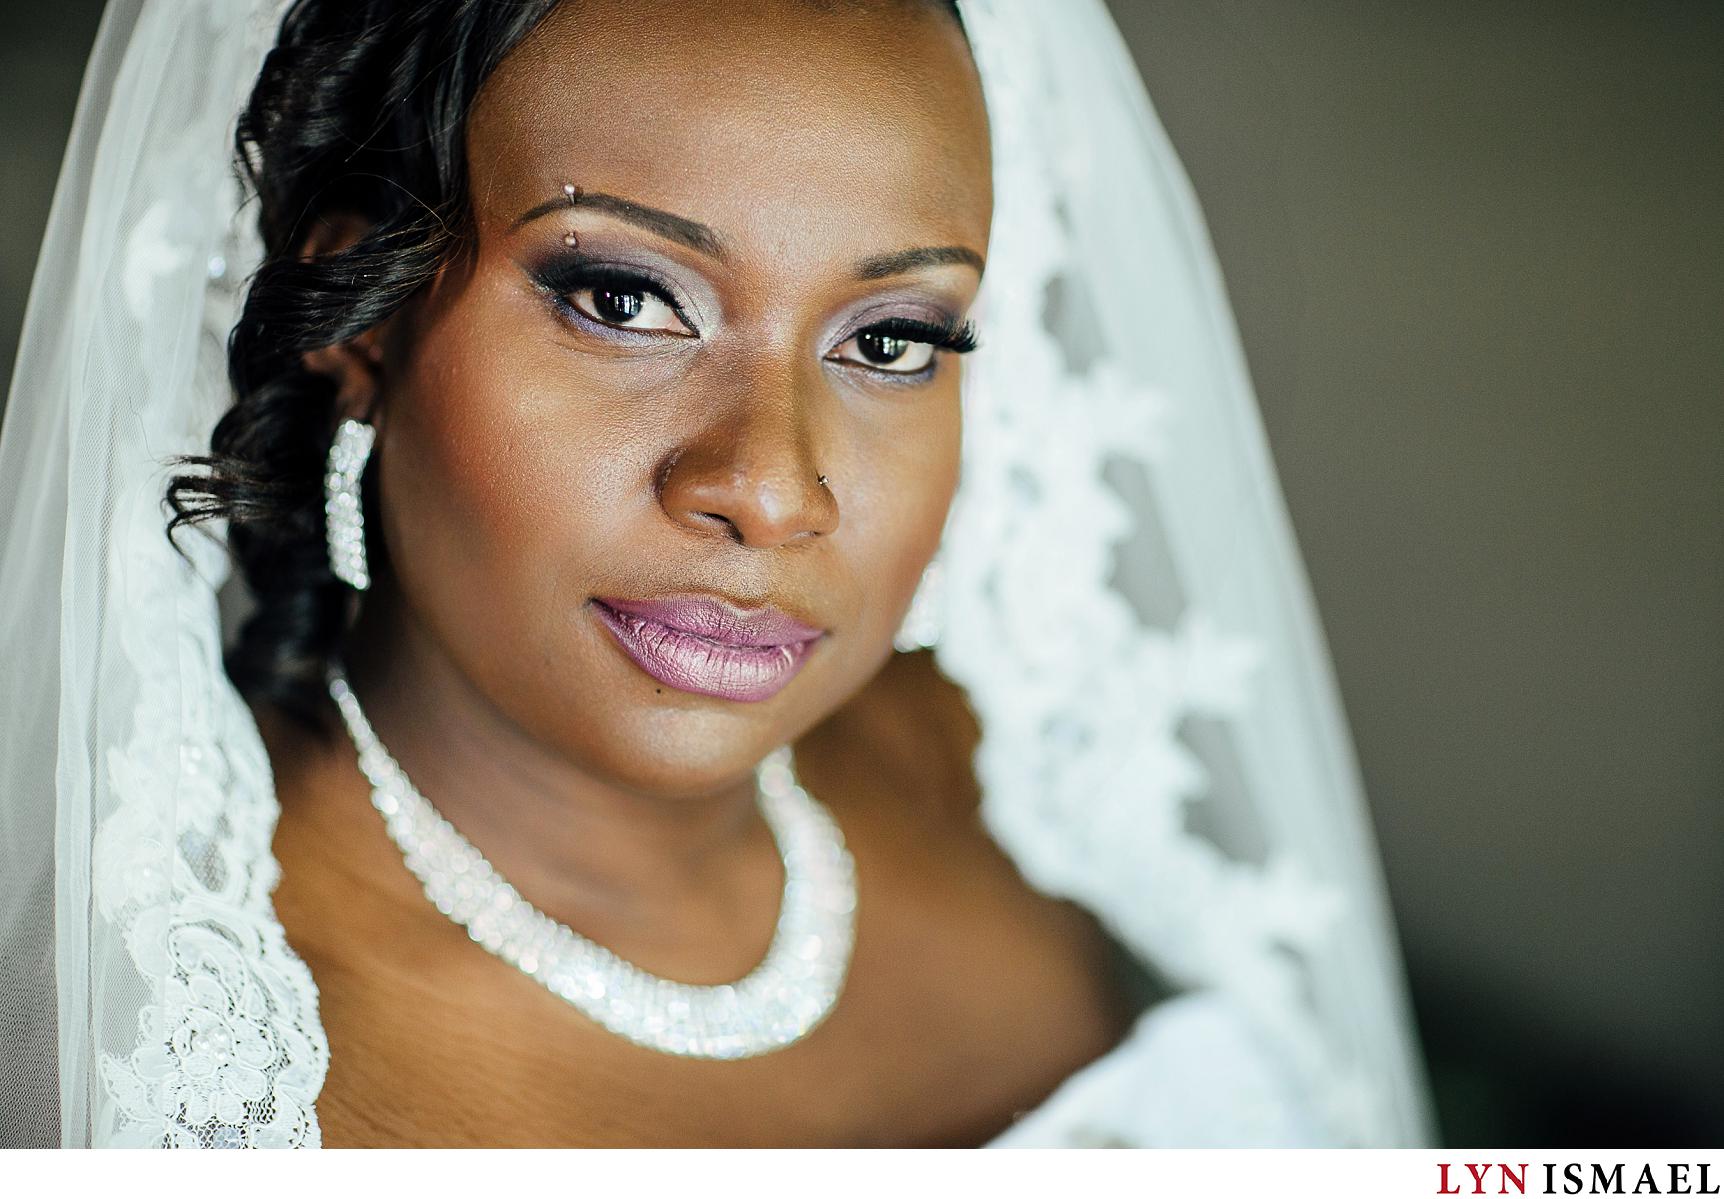 Portrait of a beautiful African-American bride where a makeup artist used purple eyeshadow and lipstick